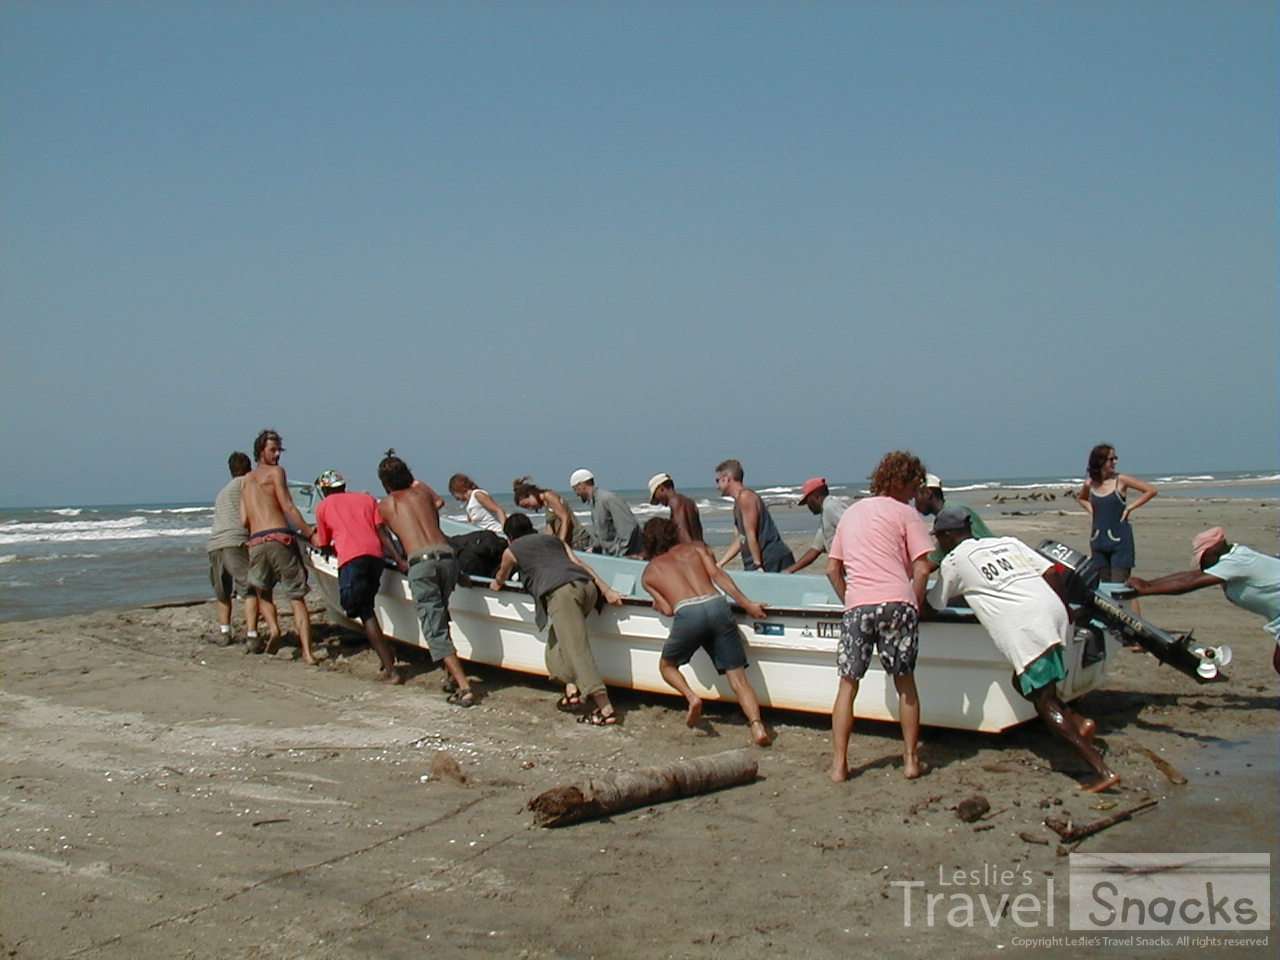 No problem, we'll just all carry the boat over to the ocean.